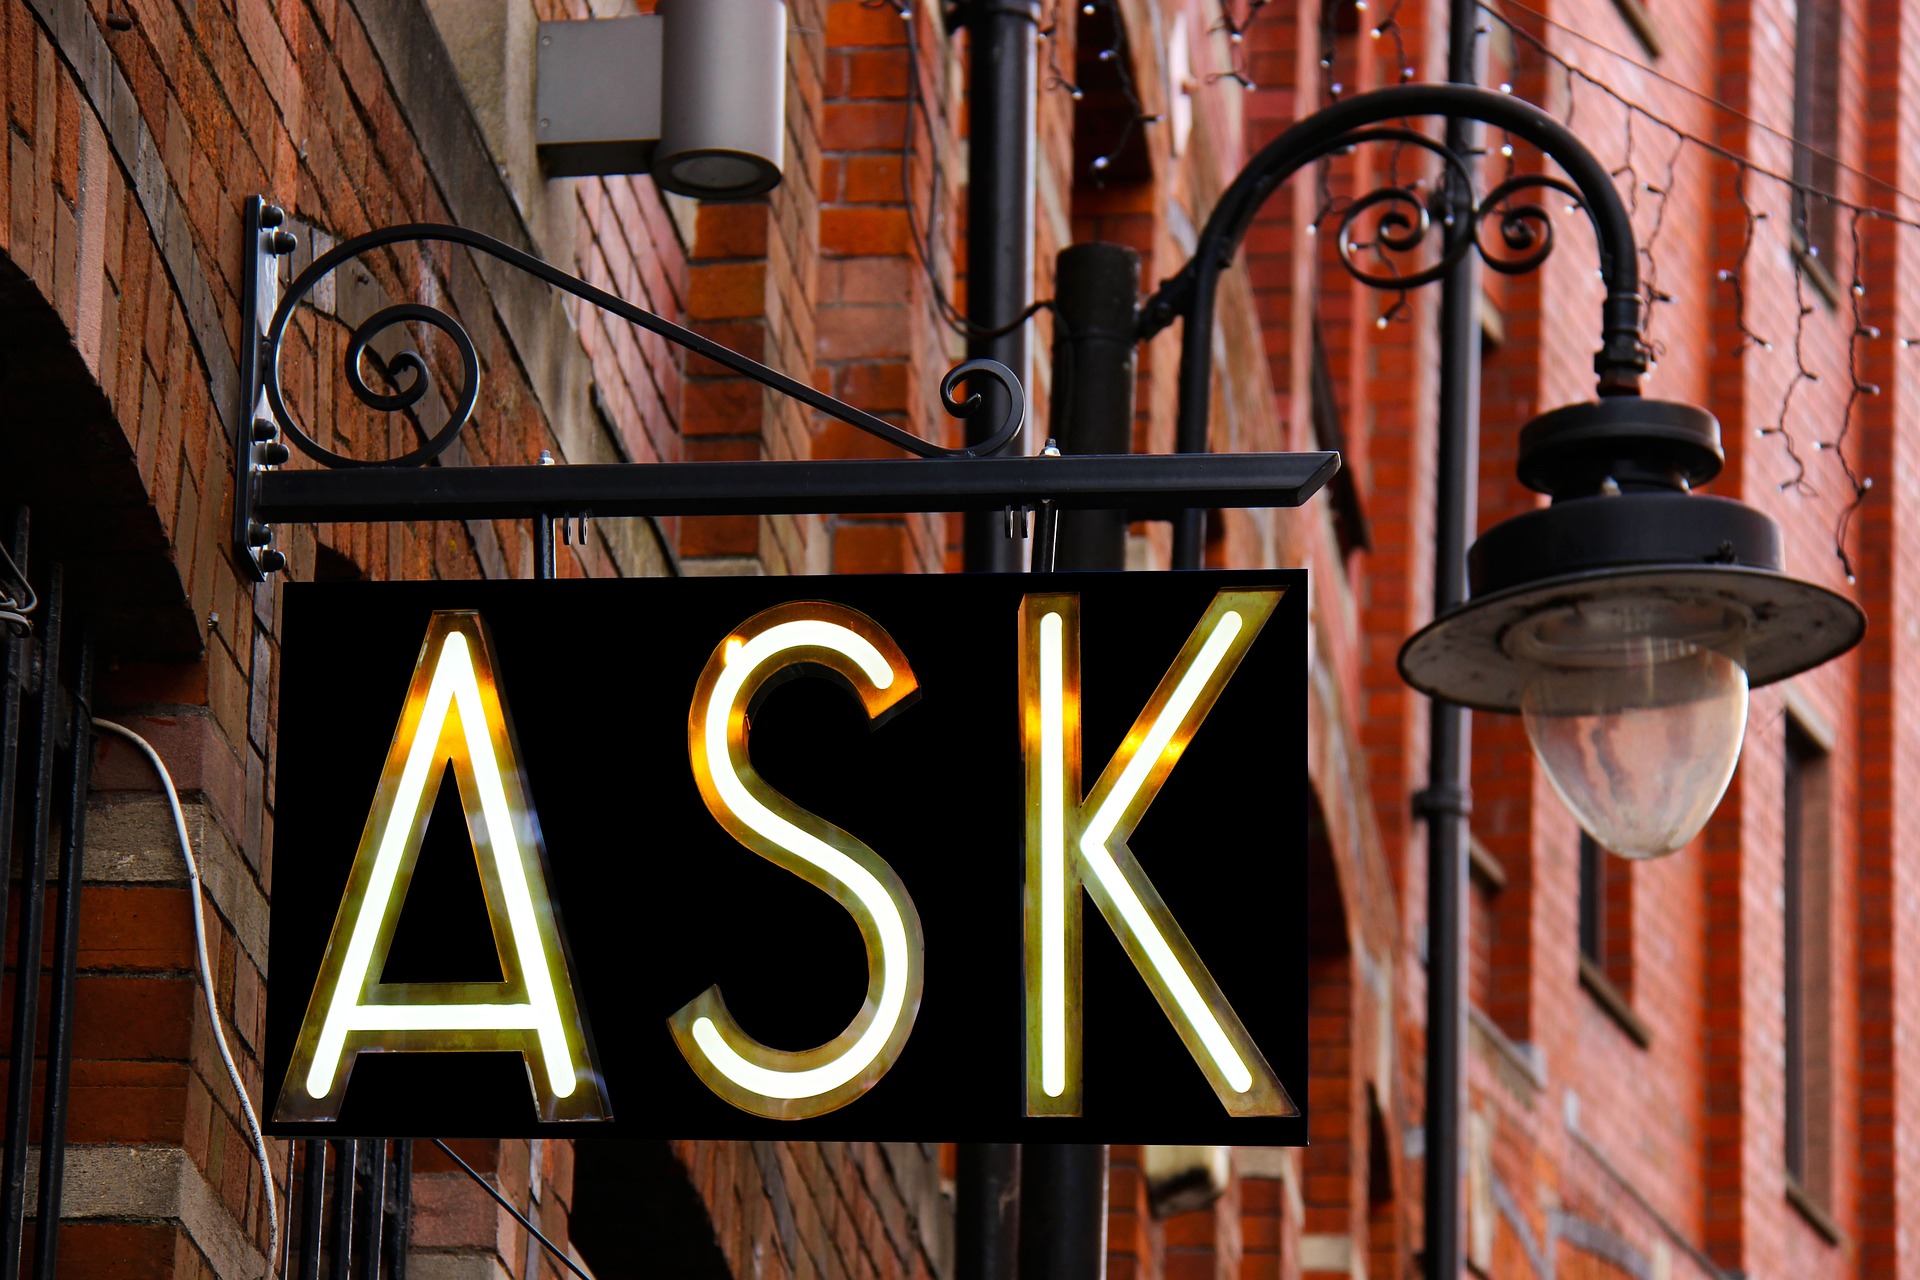 "Ask" sign